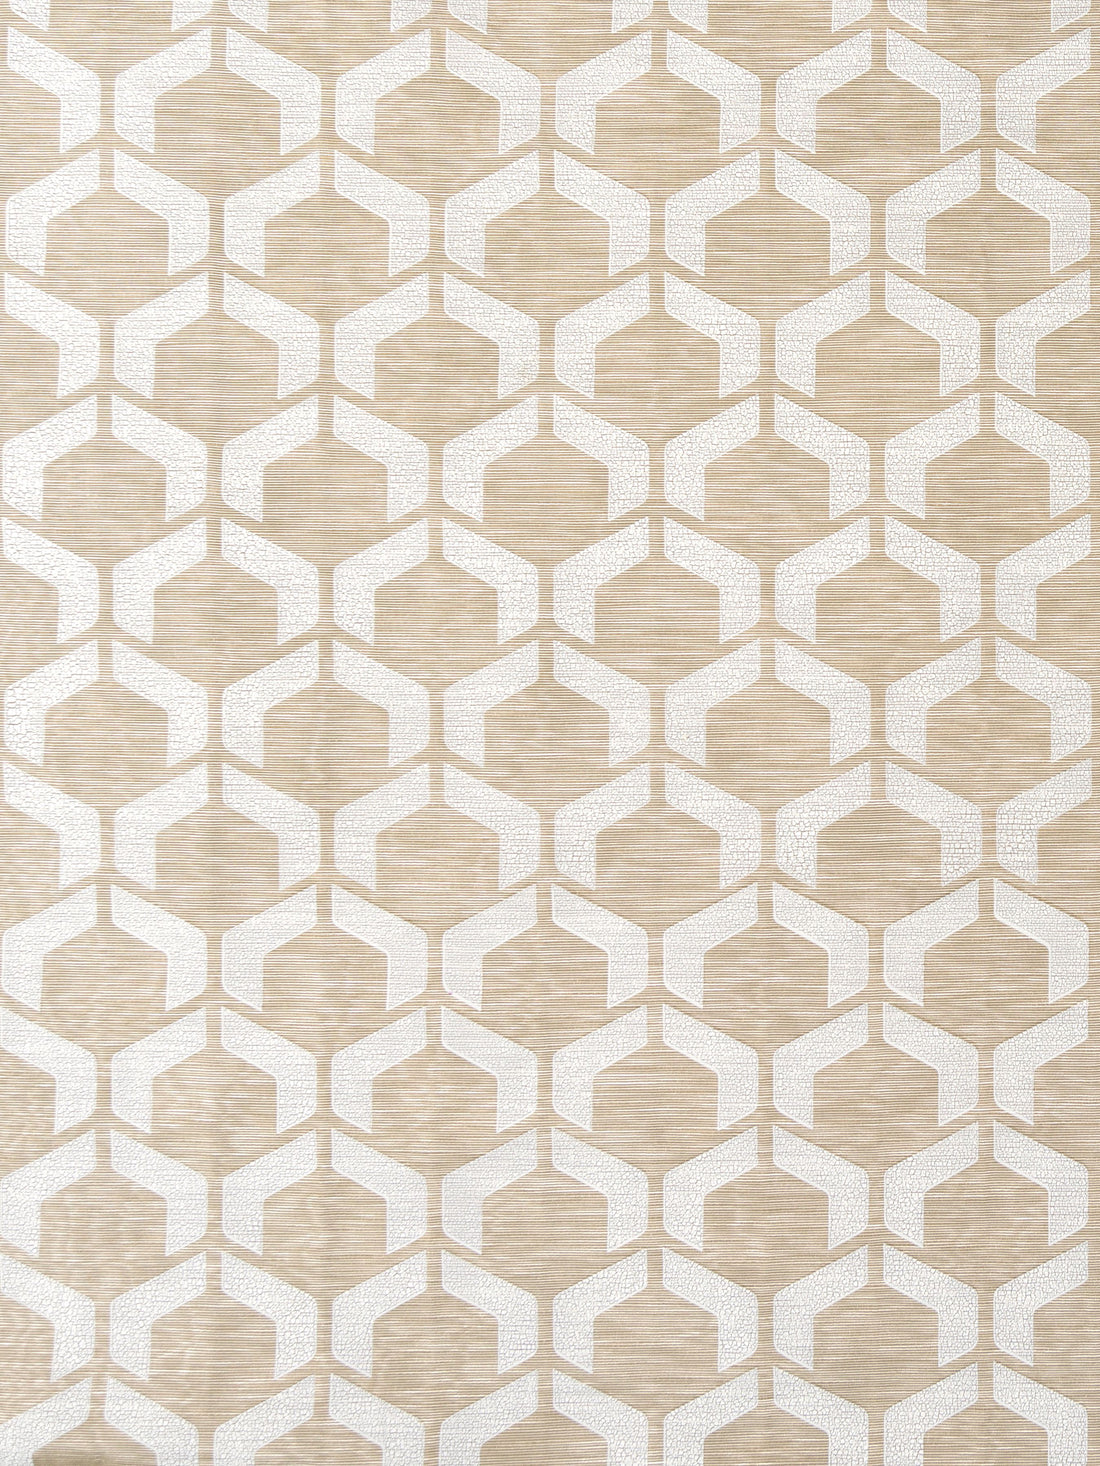 Craquele fabric in straw color - pattern number DB 0003D297 - by Scalamandre in the Old World Weavers collection